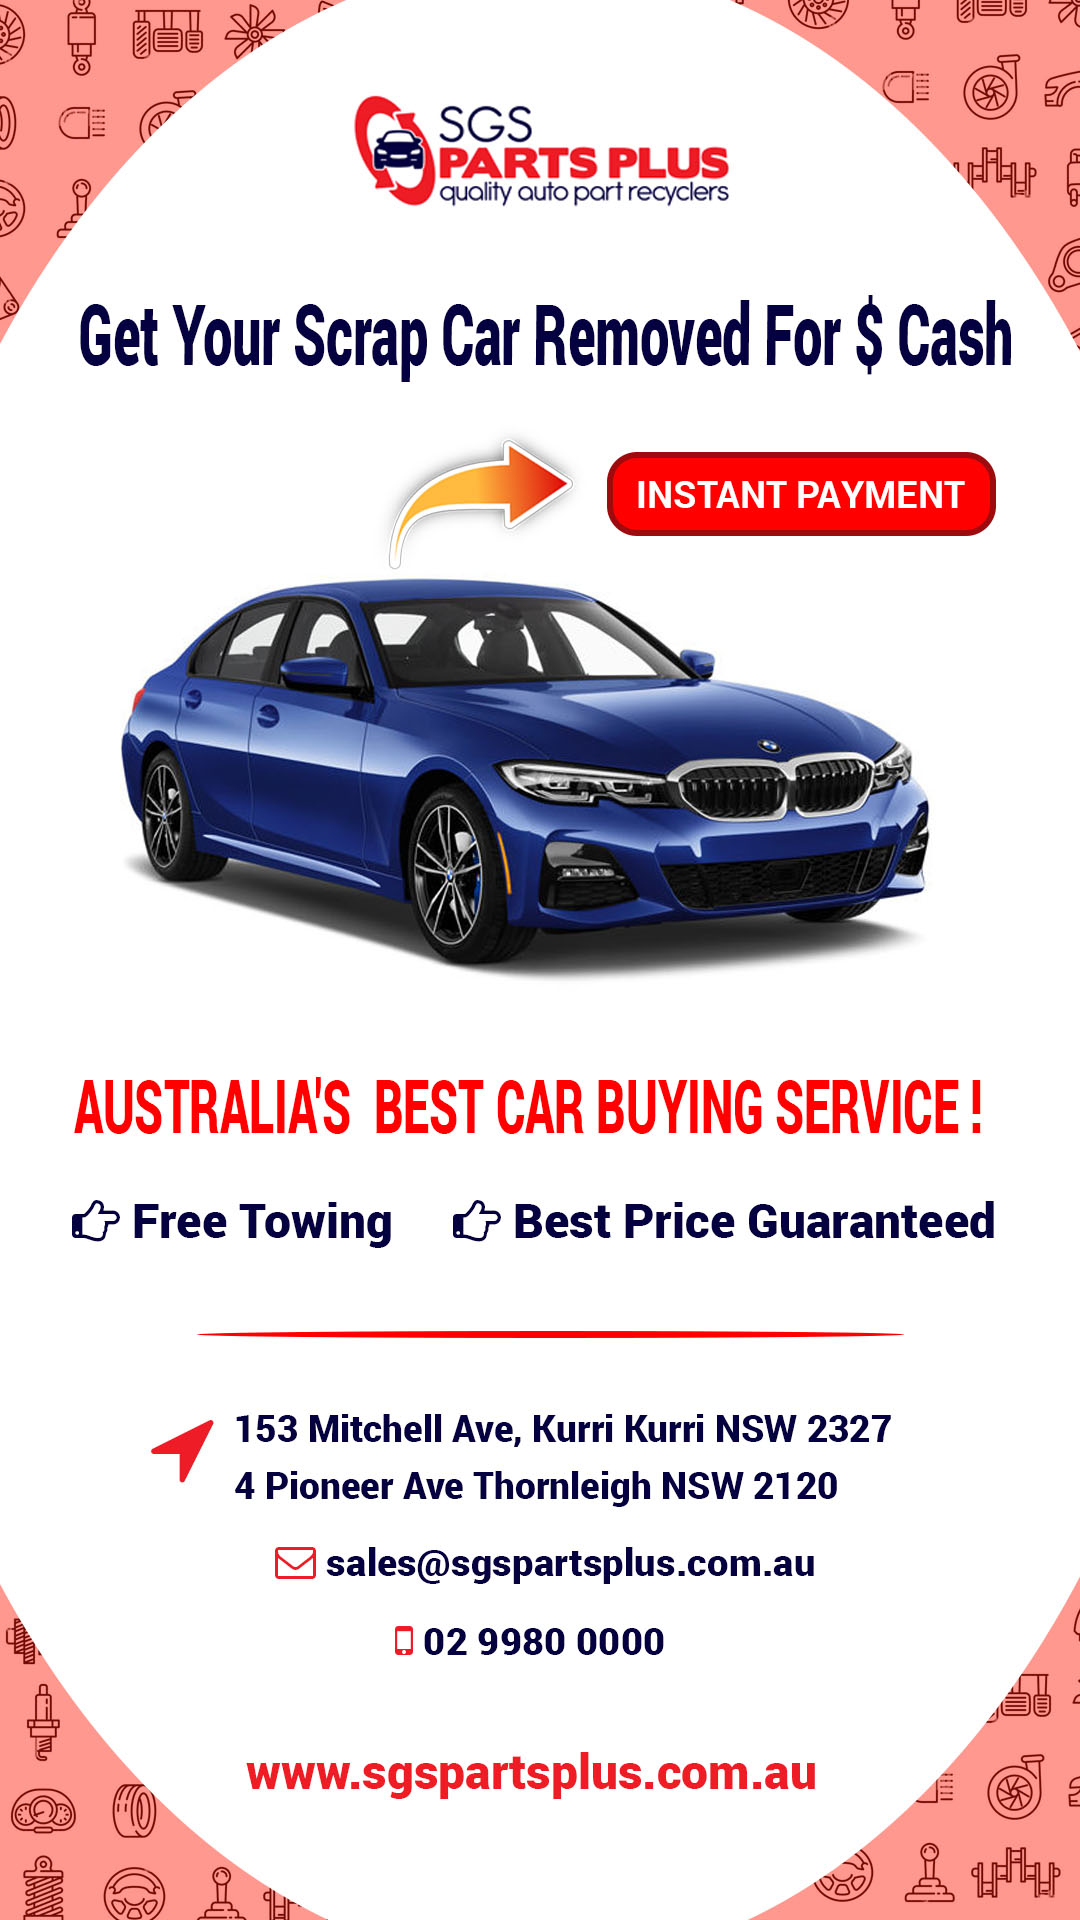 Get Top Dollar For Your Old & Unwanted Car With This Removal Service In Sydney